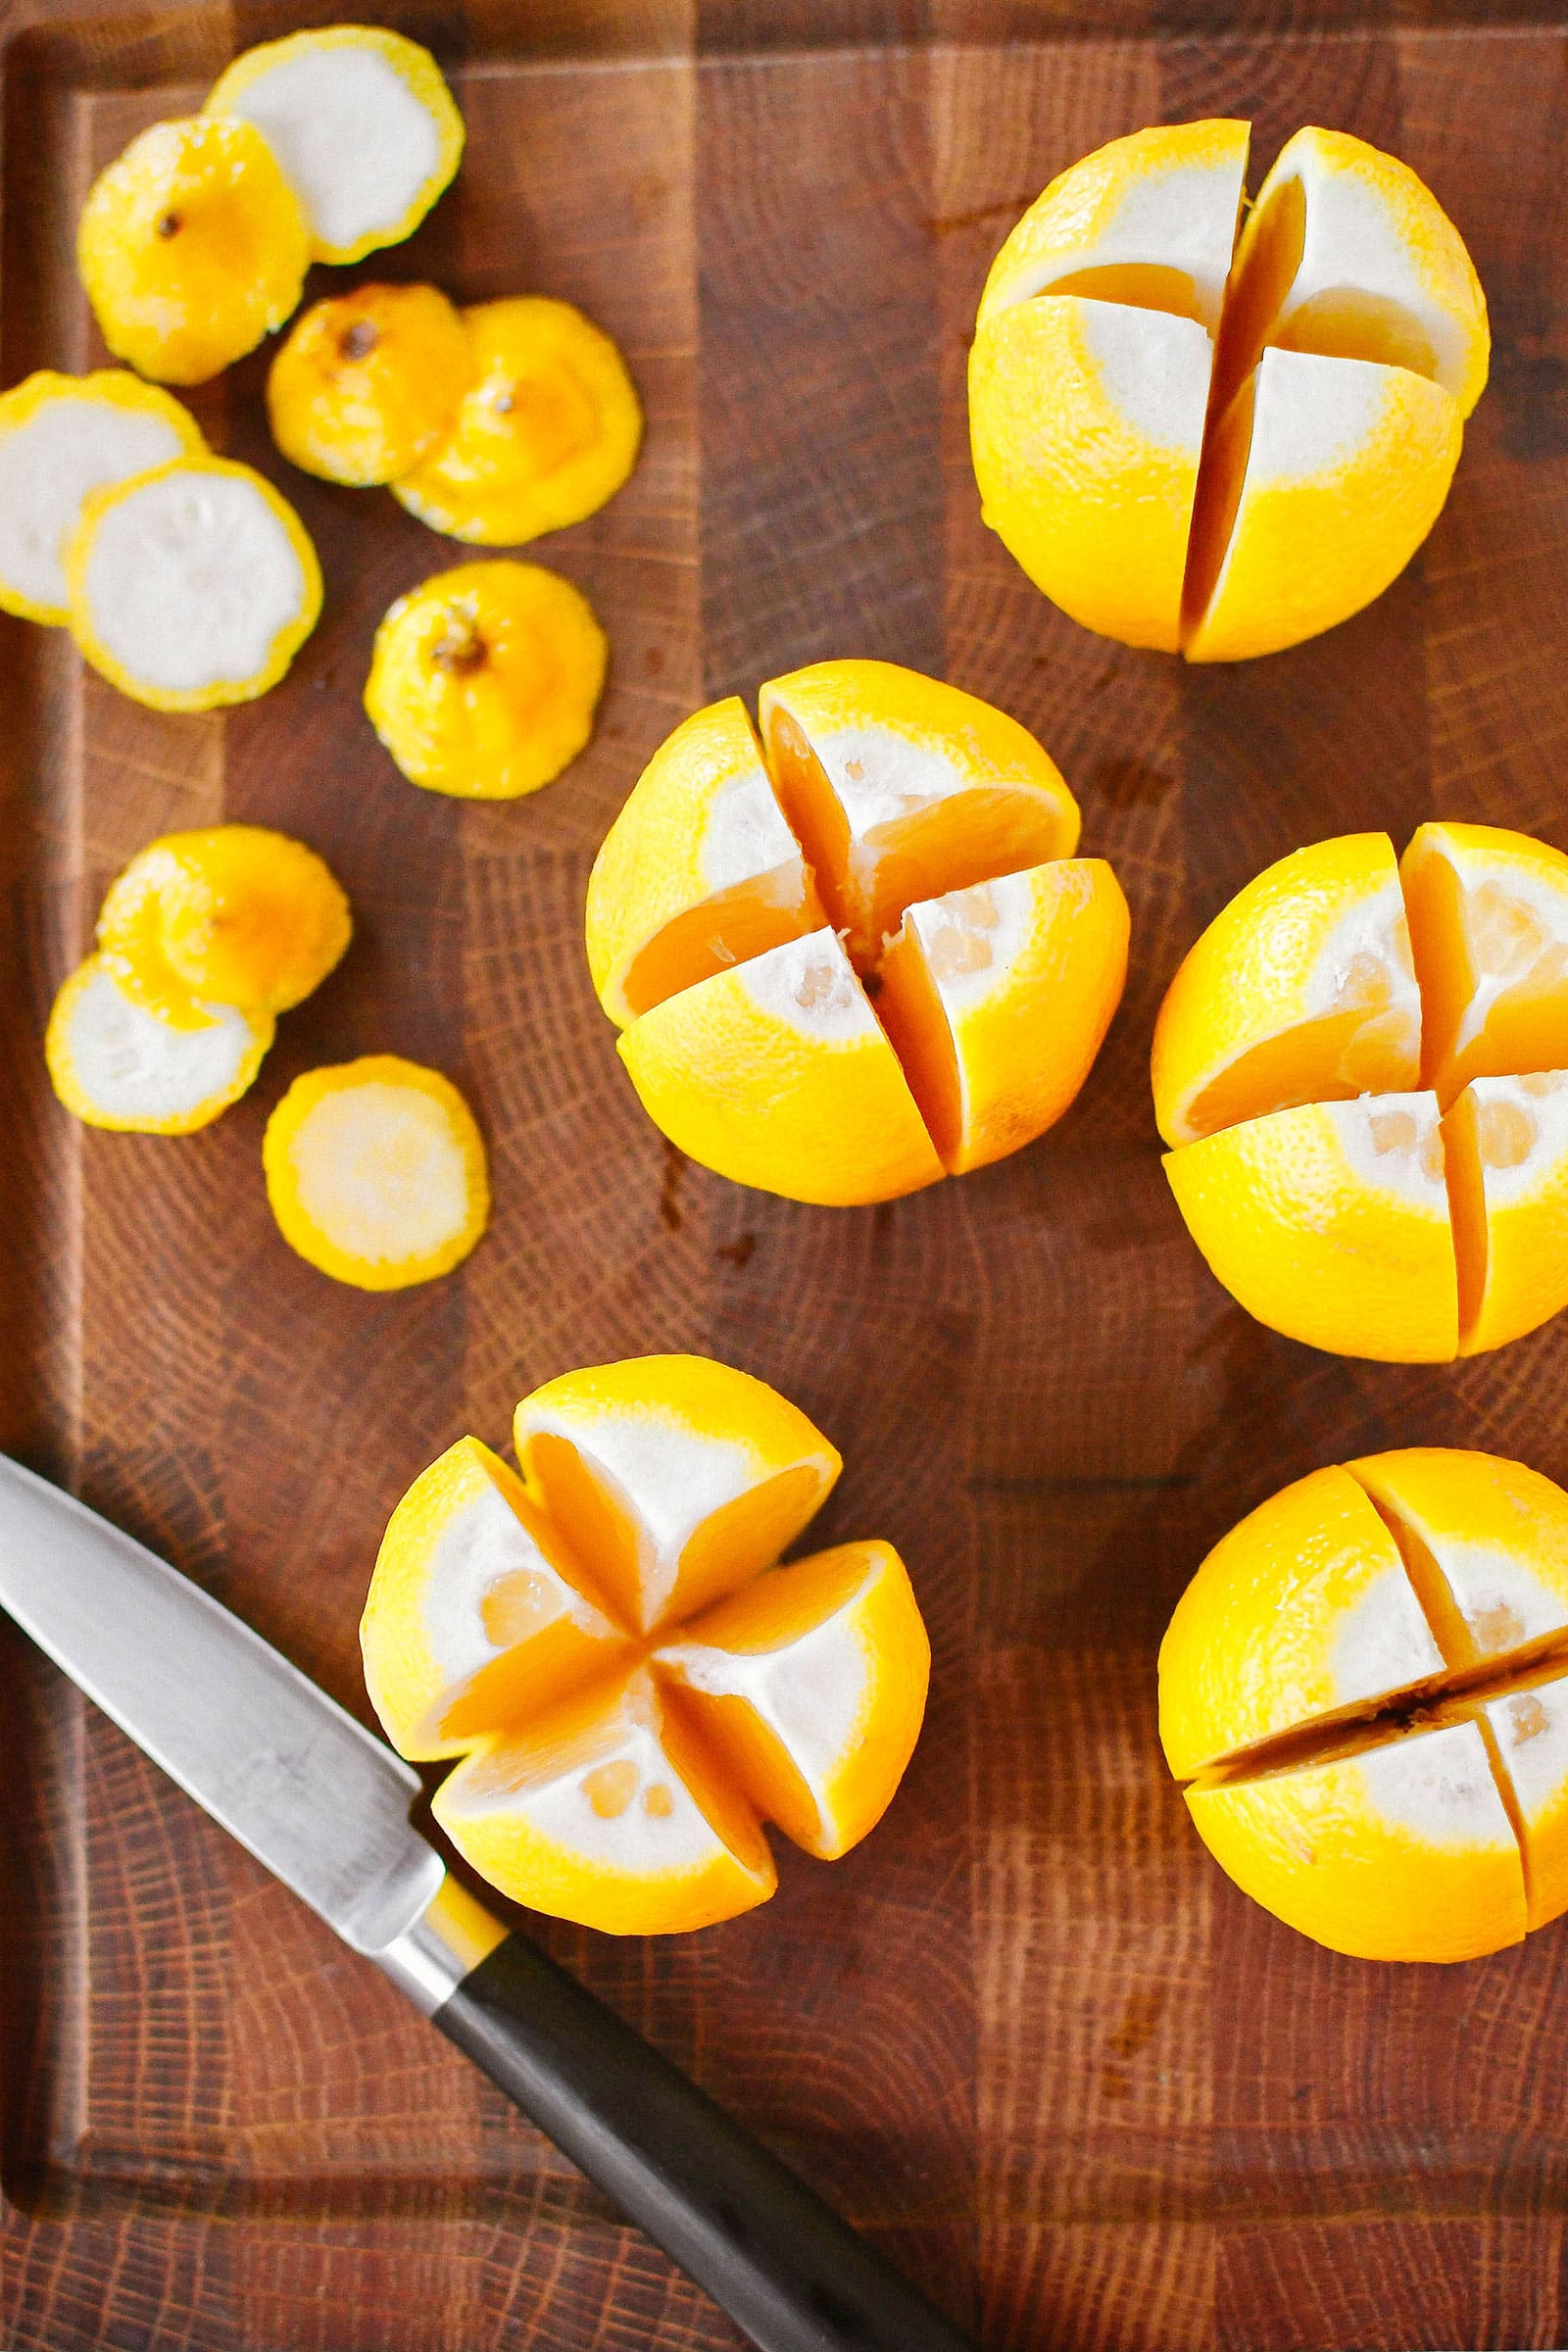 Lemons and a knife on a cutting board, with each lemon quartered lengthwise